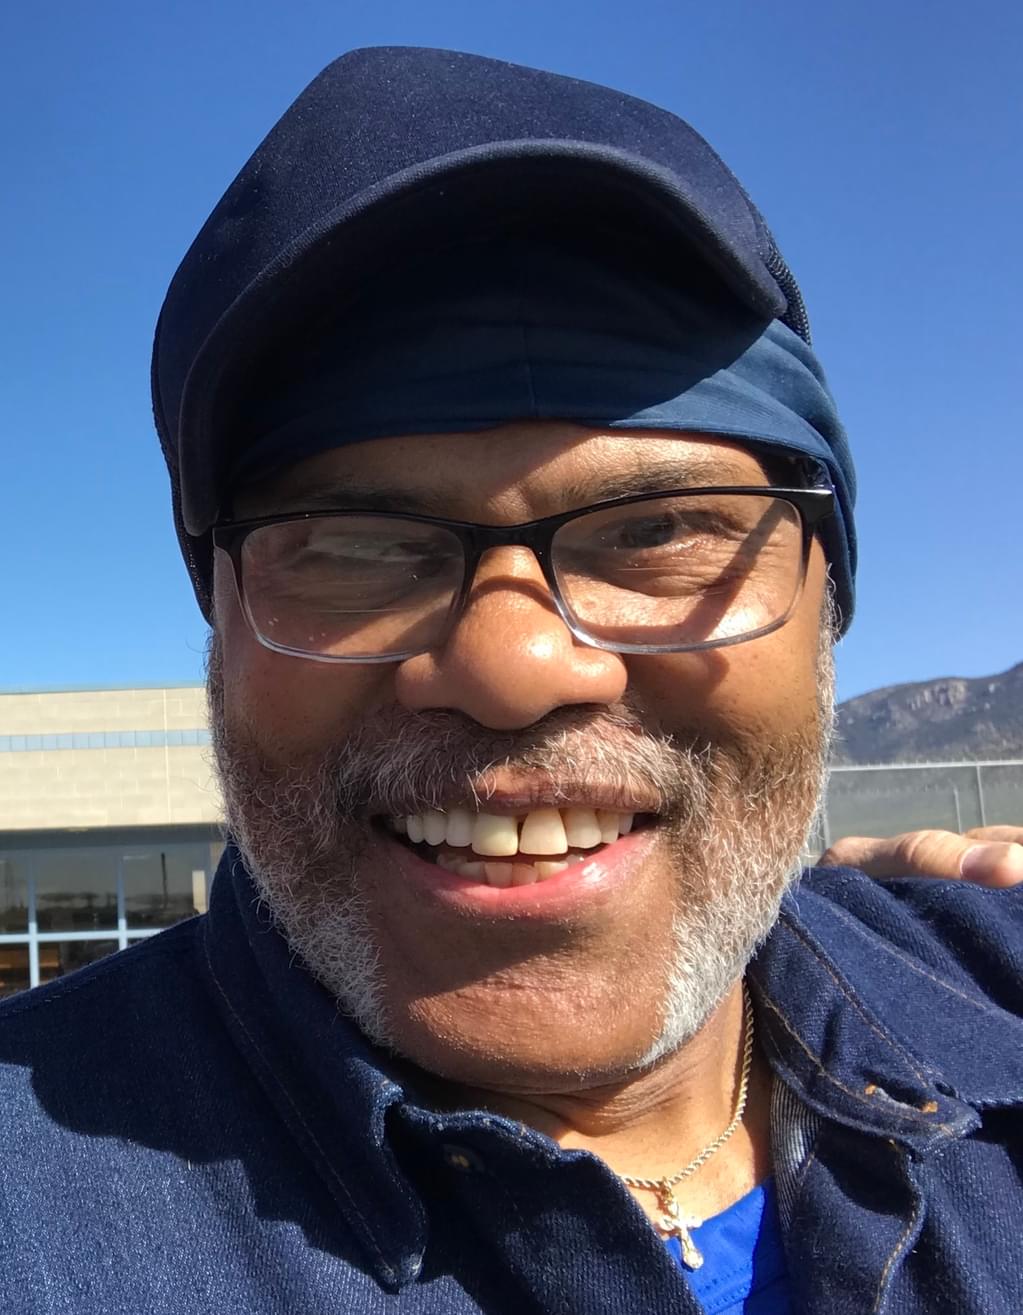 Nevada Man Convicted by Prosecutorial Misconduct and ‘Woefully Inadequate’ Defense Counsel Released After 33 Years on Death Row